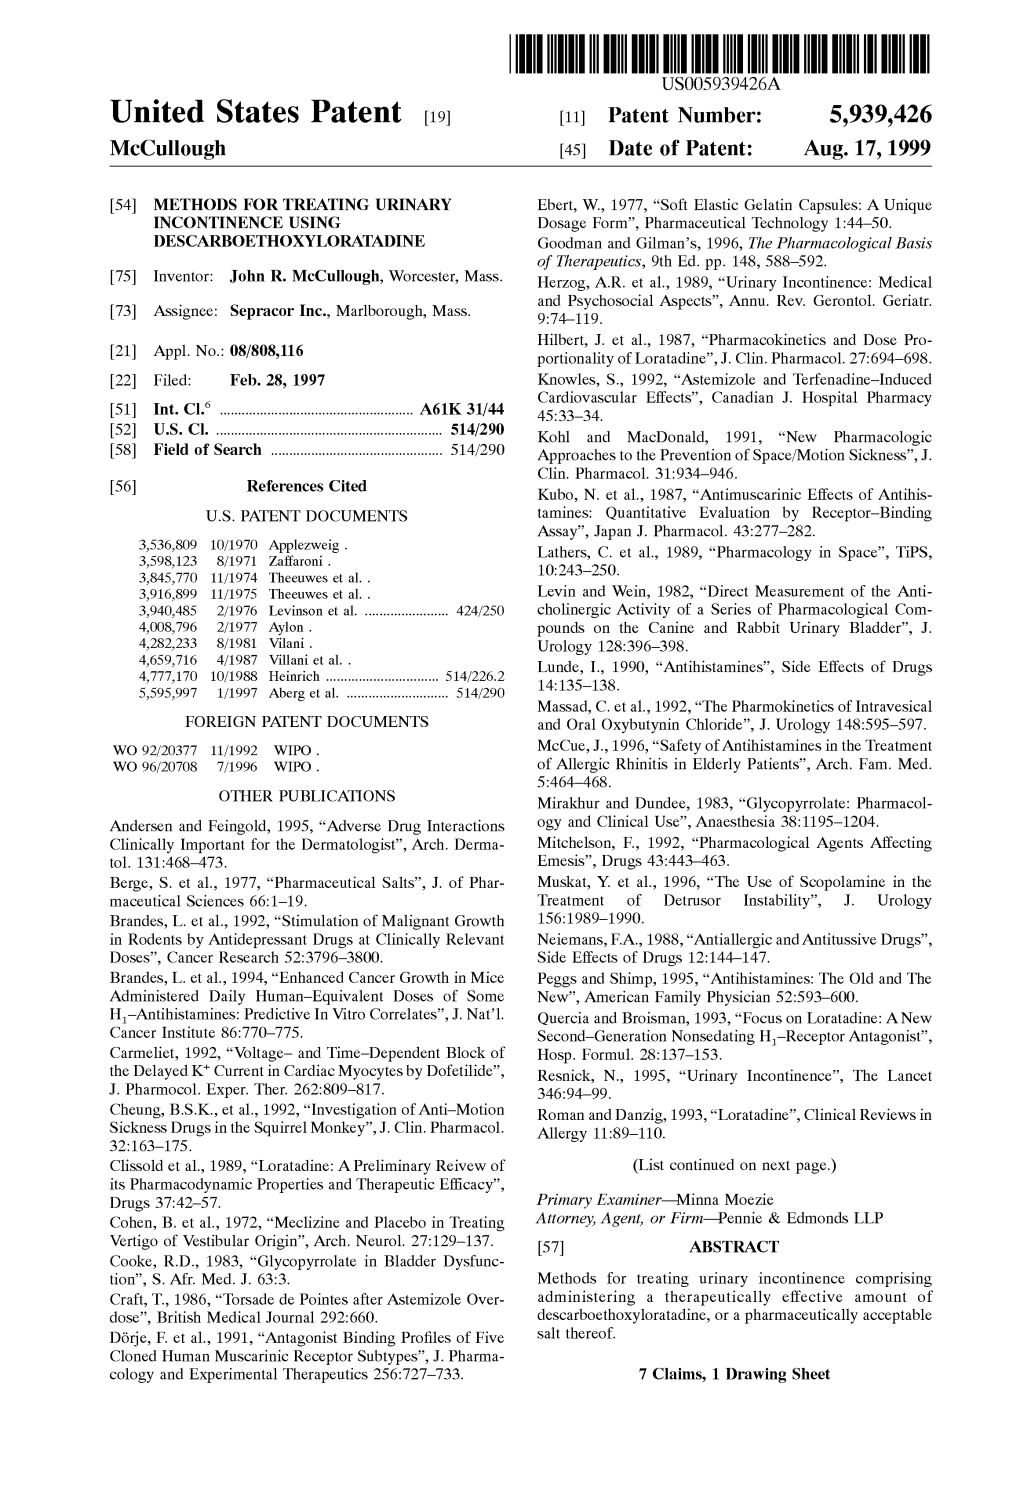 United States Patent (19) 11 Patent Number: 5,939.426 Mccullough (45) Date of Patent: Aug